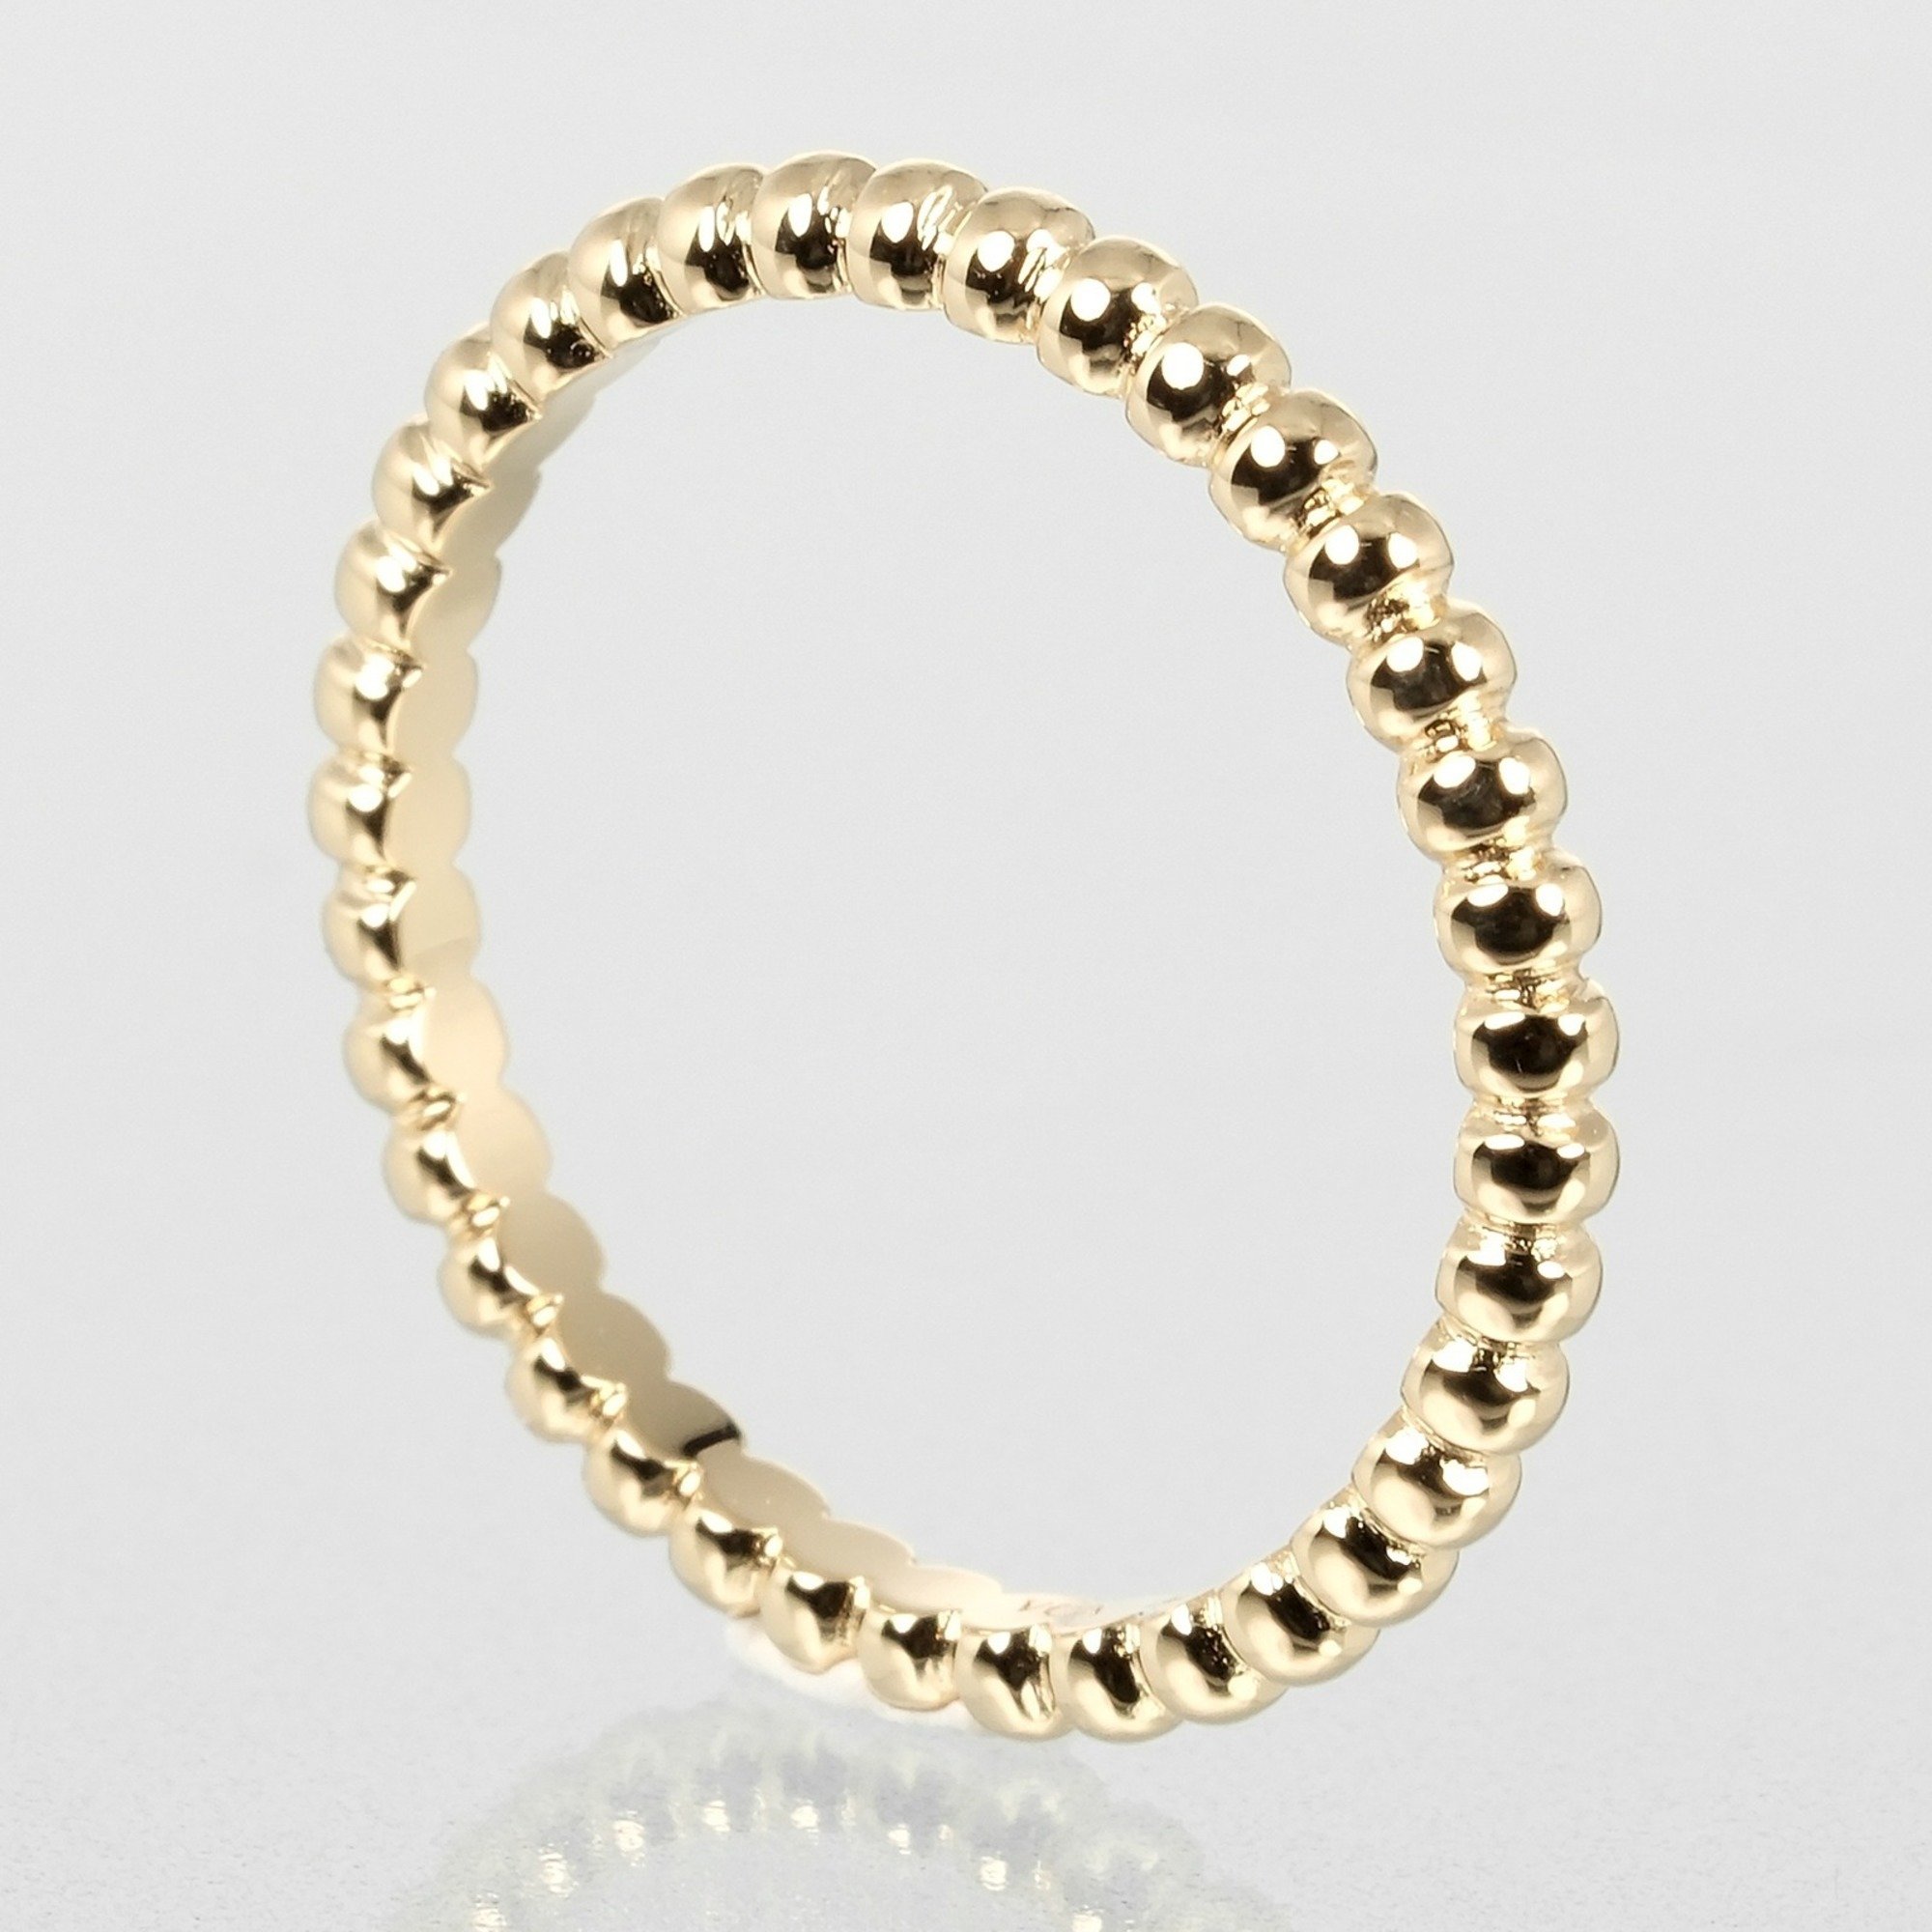 Van Cleef & Arpels Perlée Small 11.5 Ring, K18 Yellow Gold, approx. 2.03g